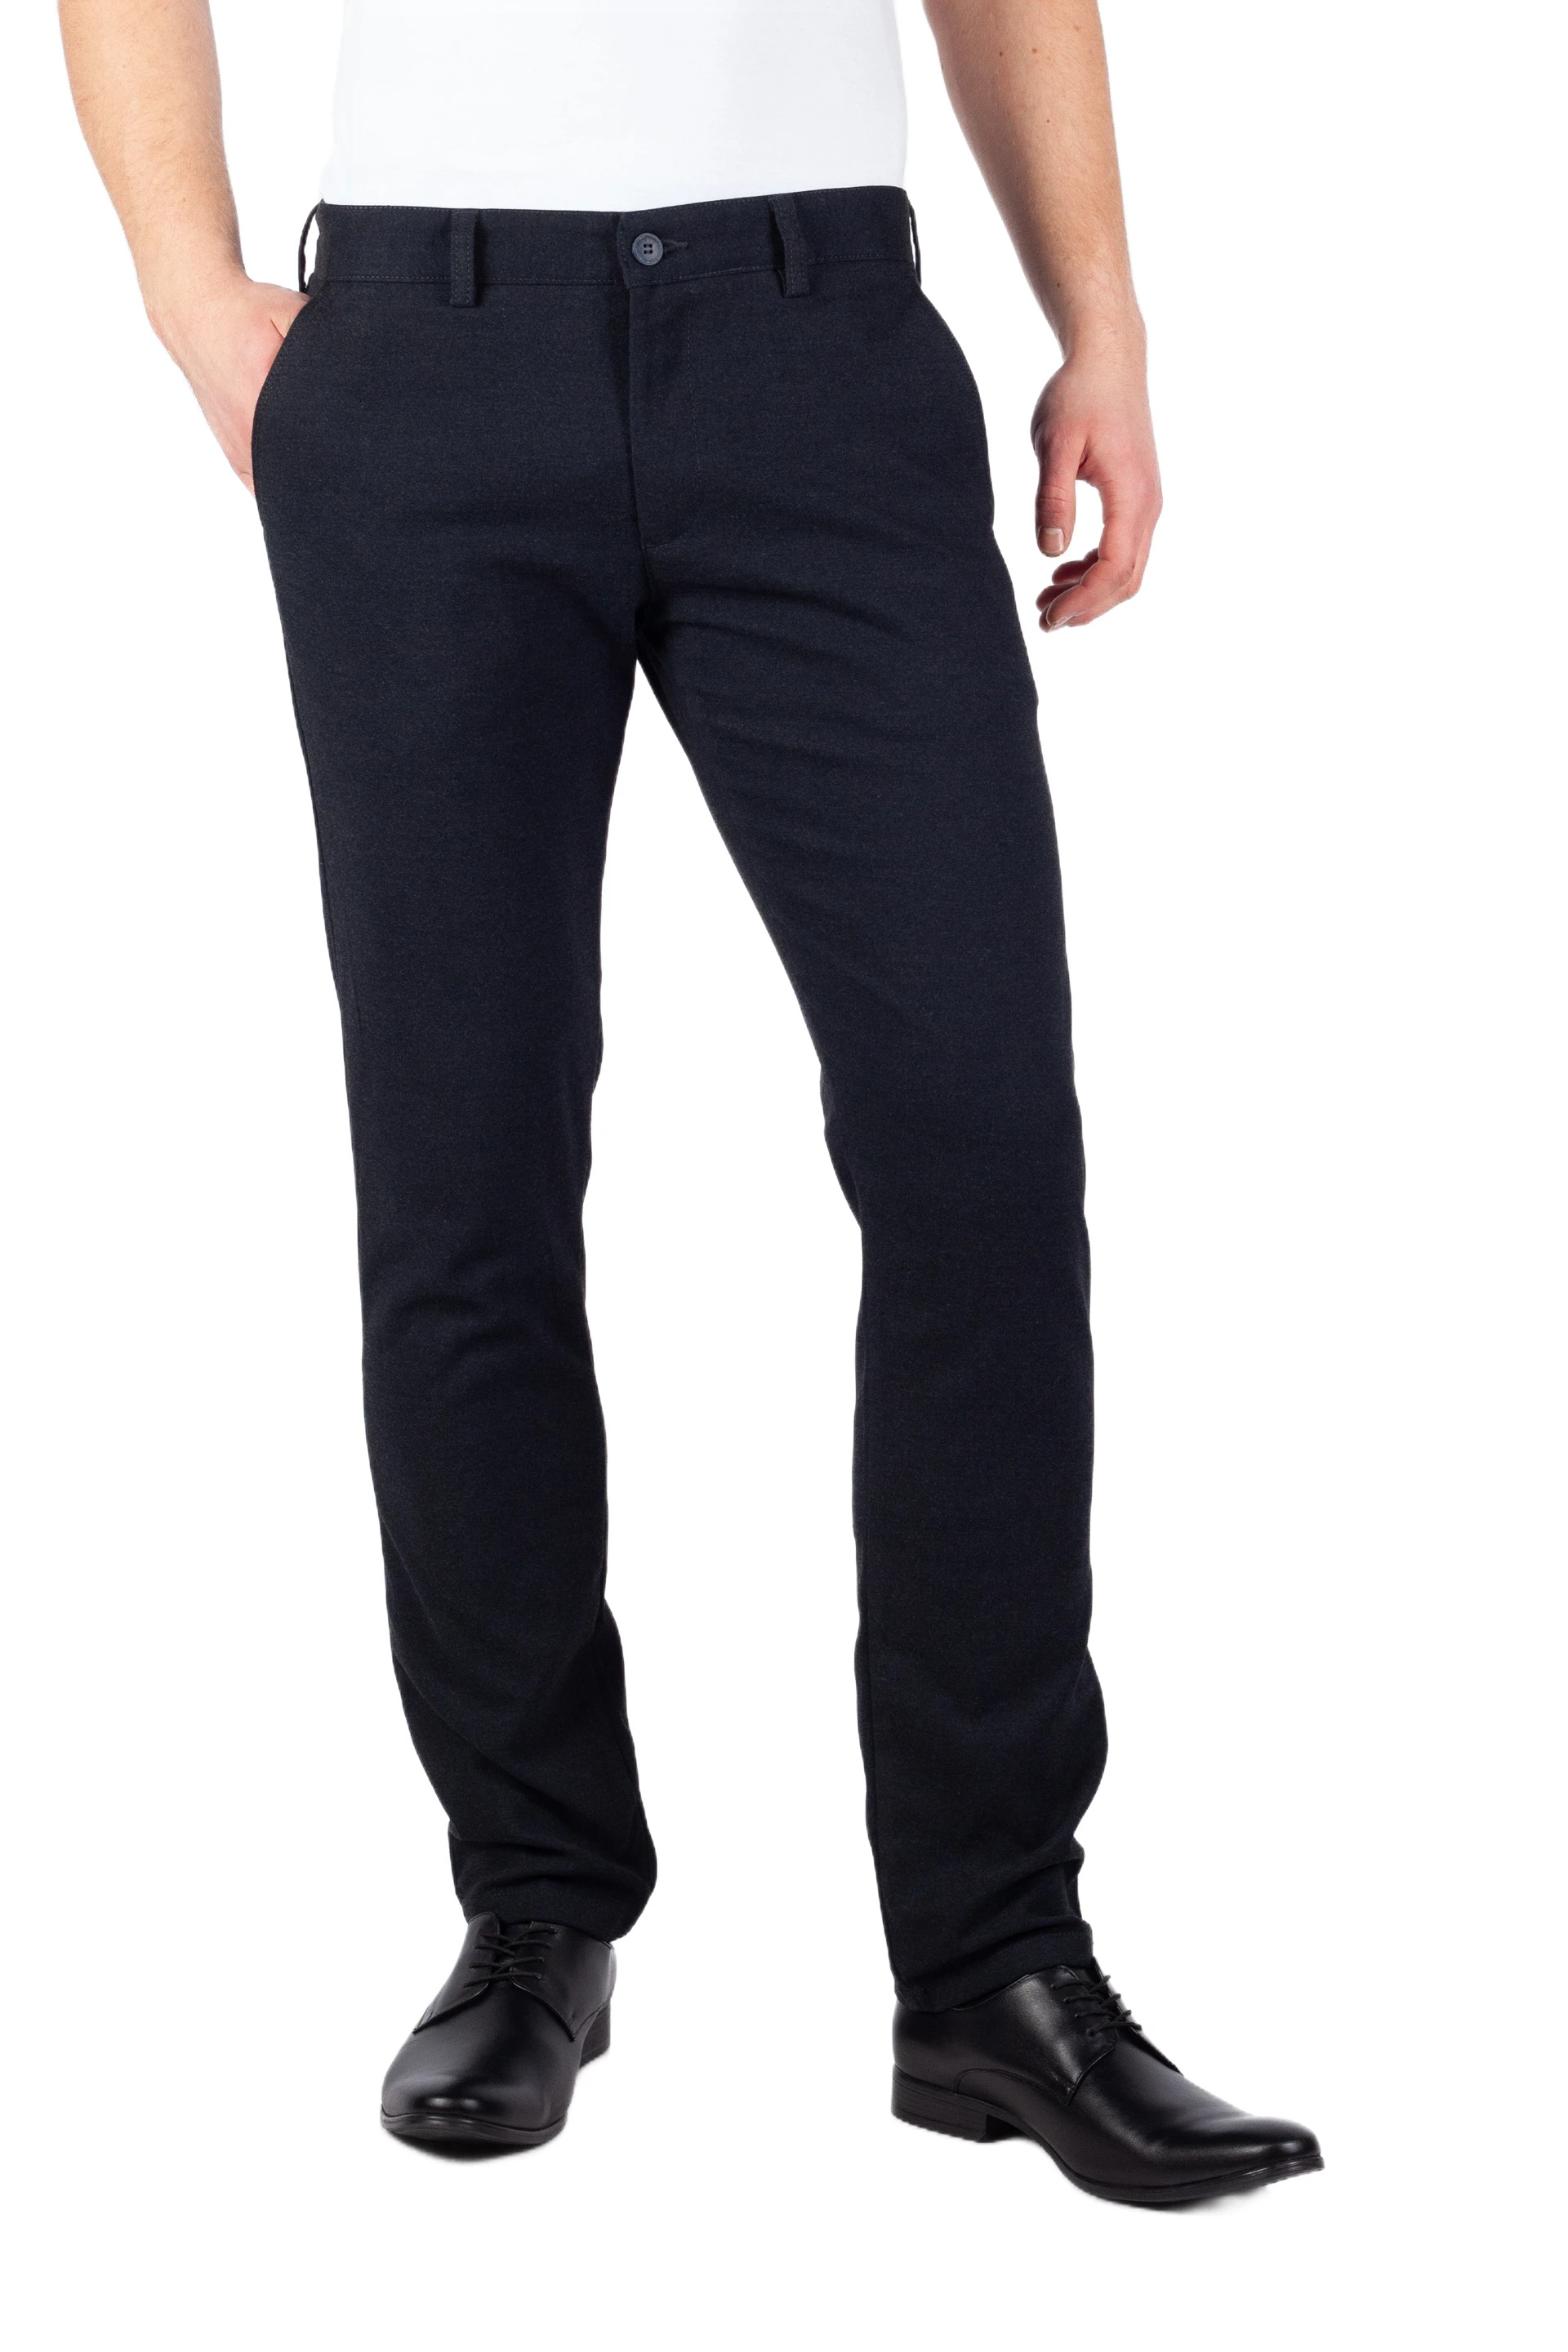 Chino pants BLK JEANS 8375-1071-302-206